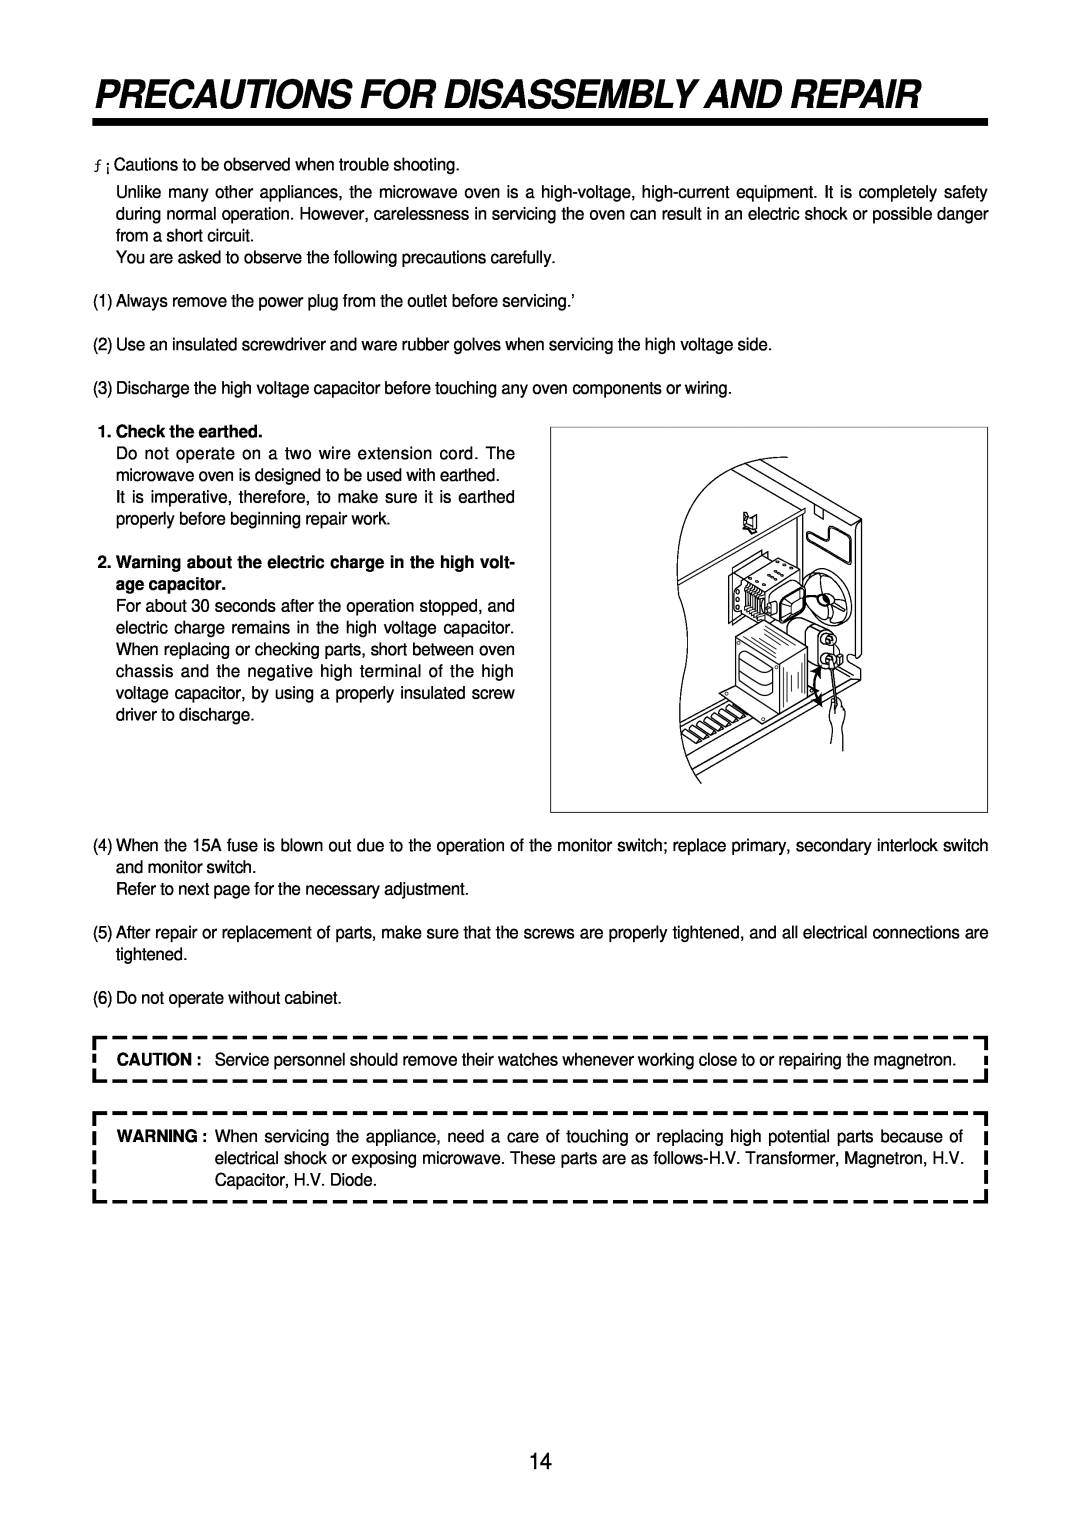 Daewoo KOR-61151, KOR-61155 service manual Precautions For Disassembly And Repair, Check the earthed 